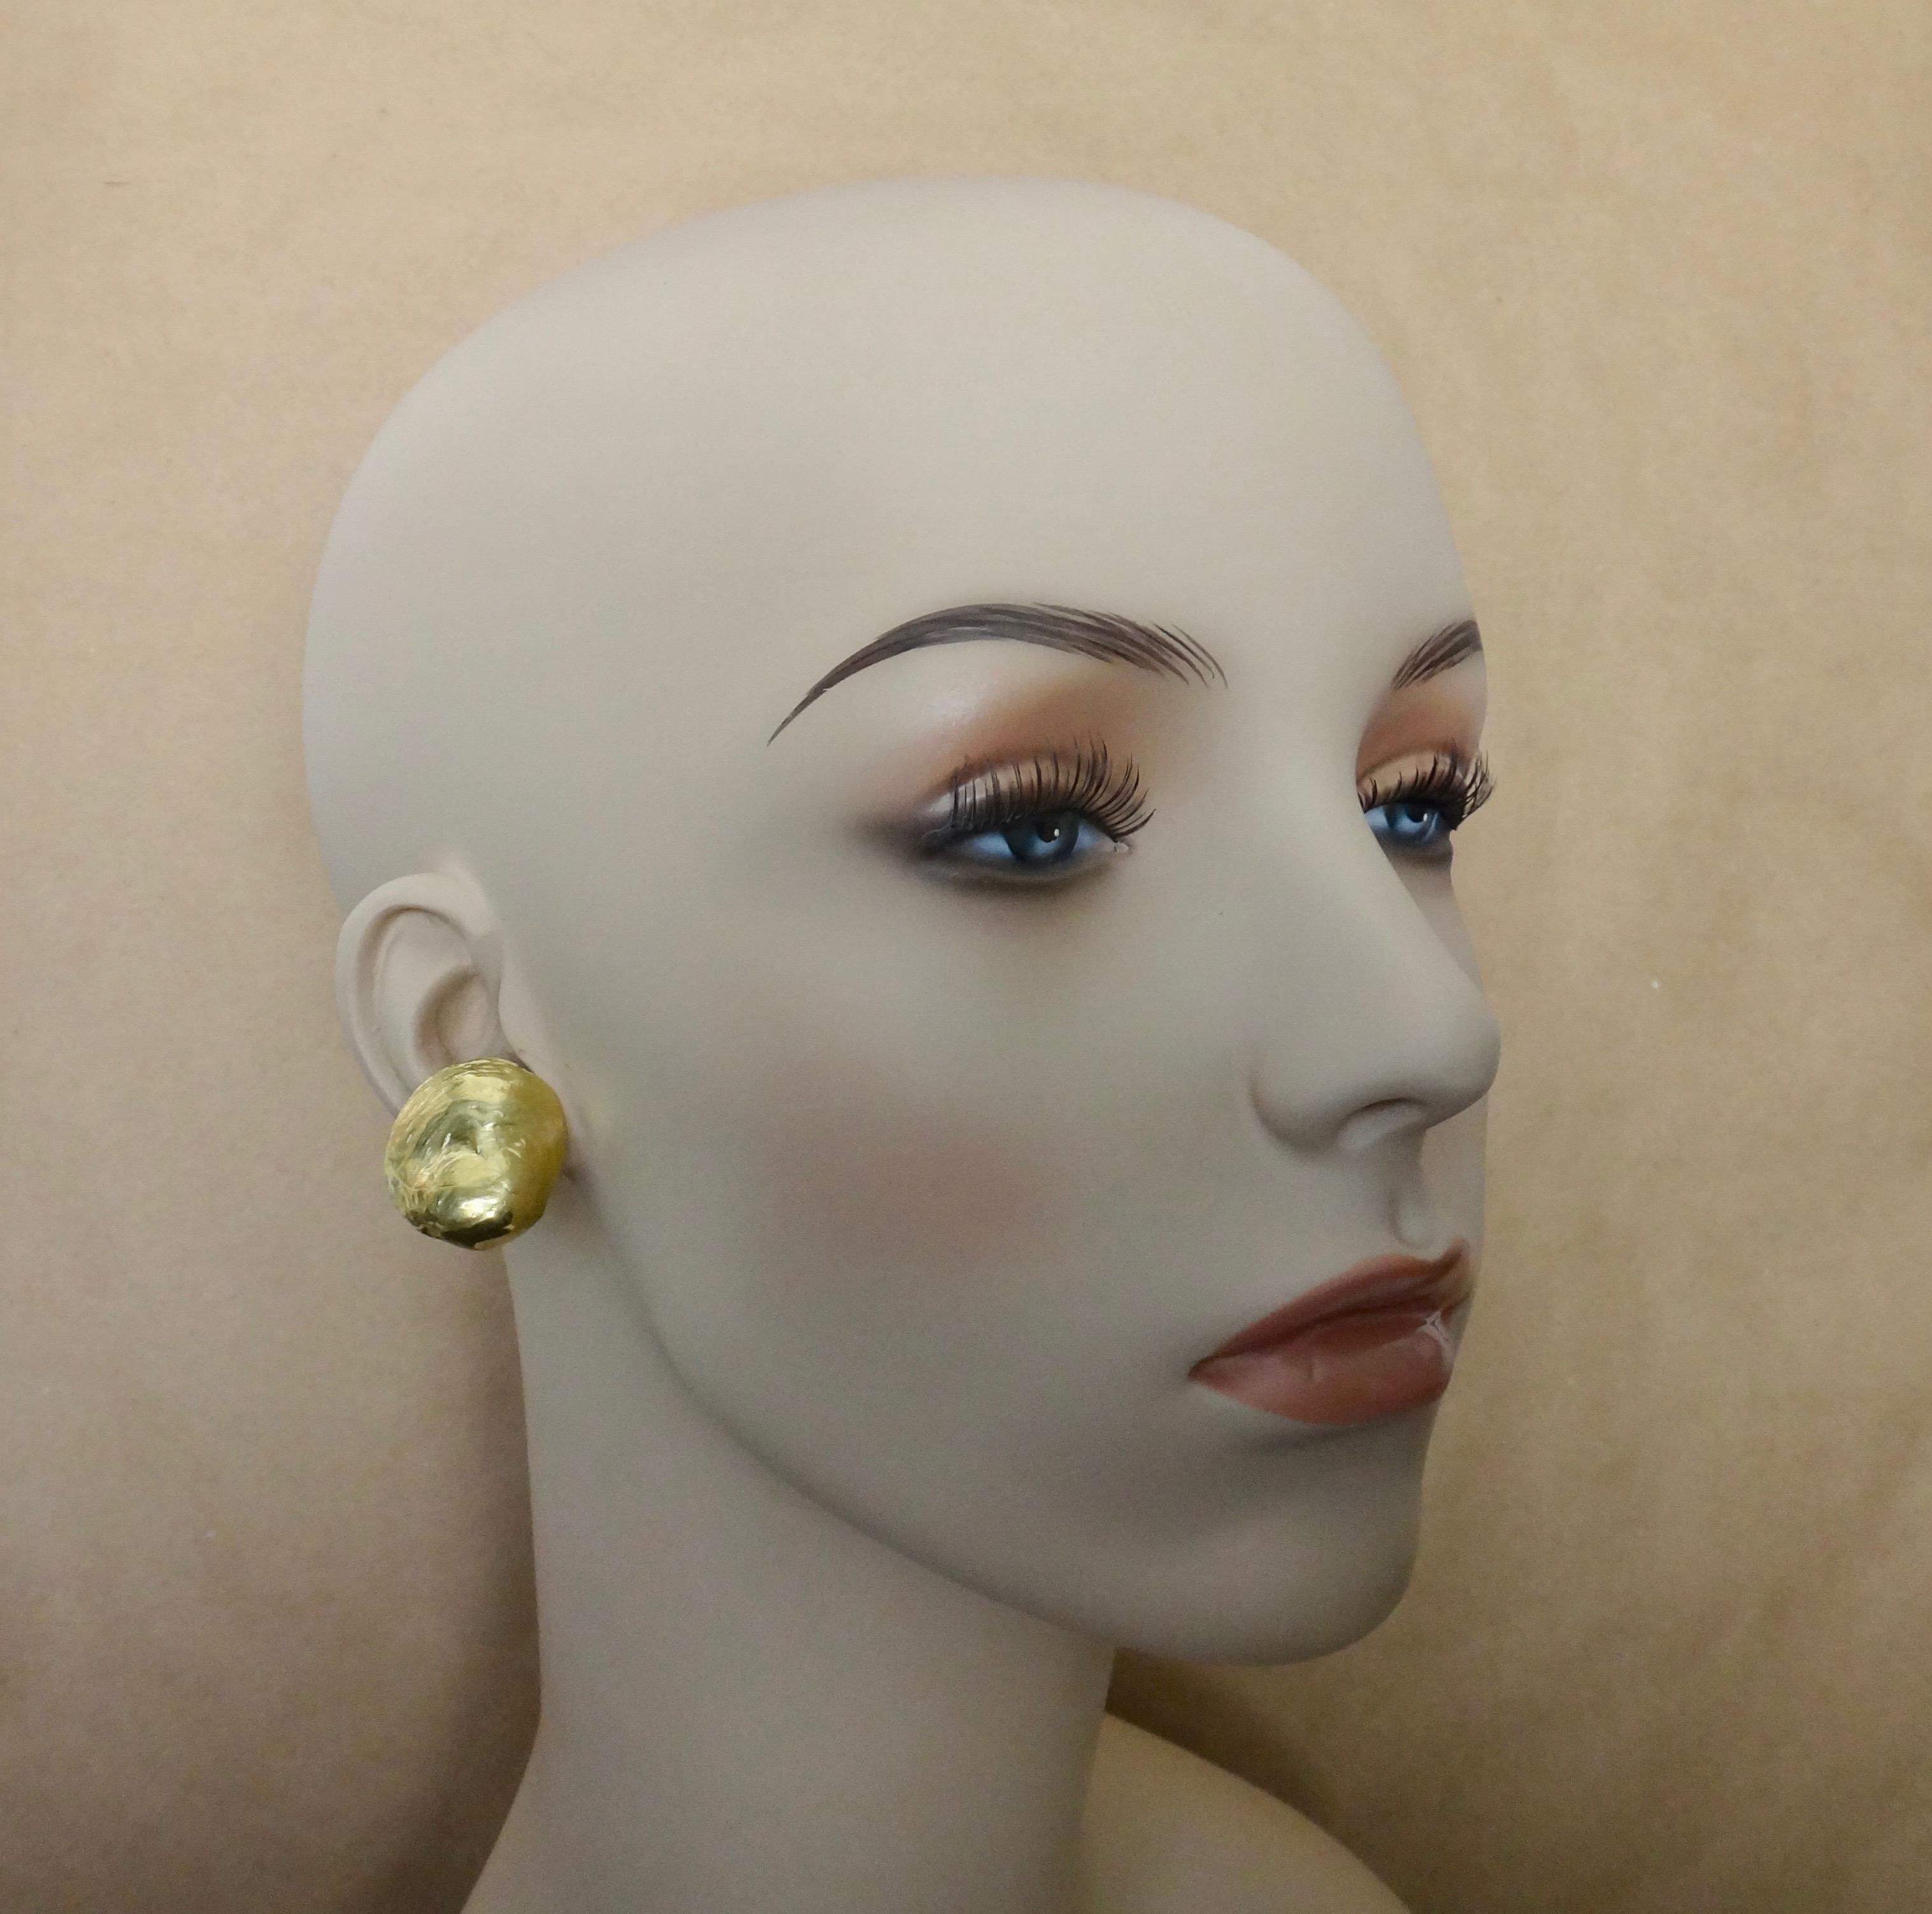 Offered are these Jingle shell earrings in 18k yellow gold.  